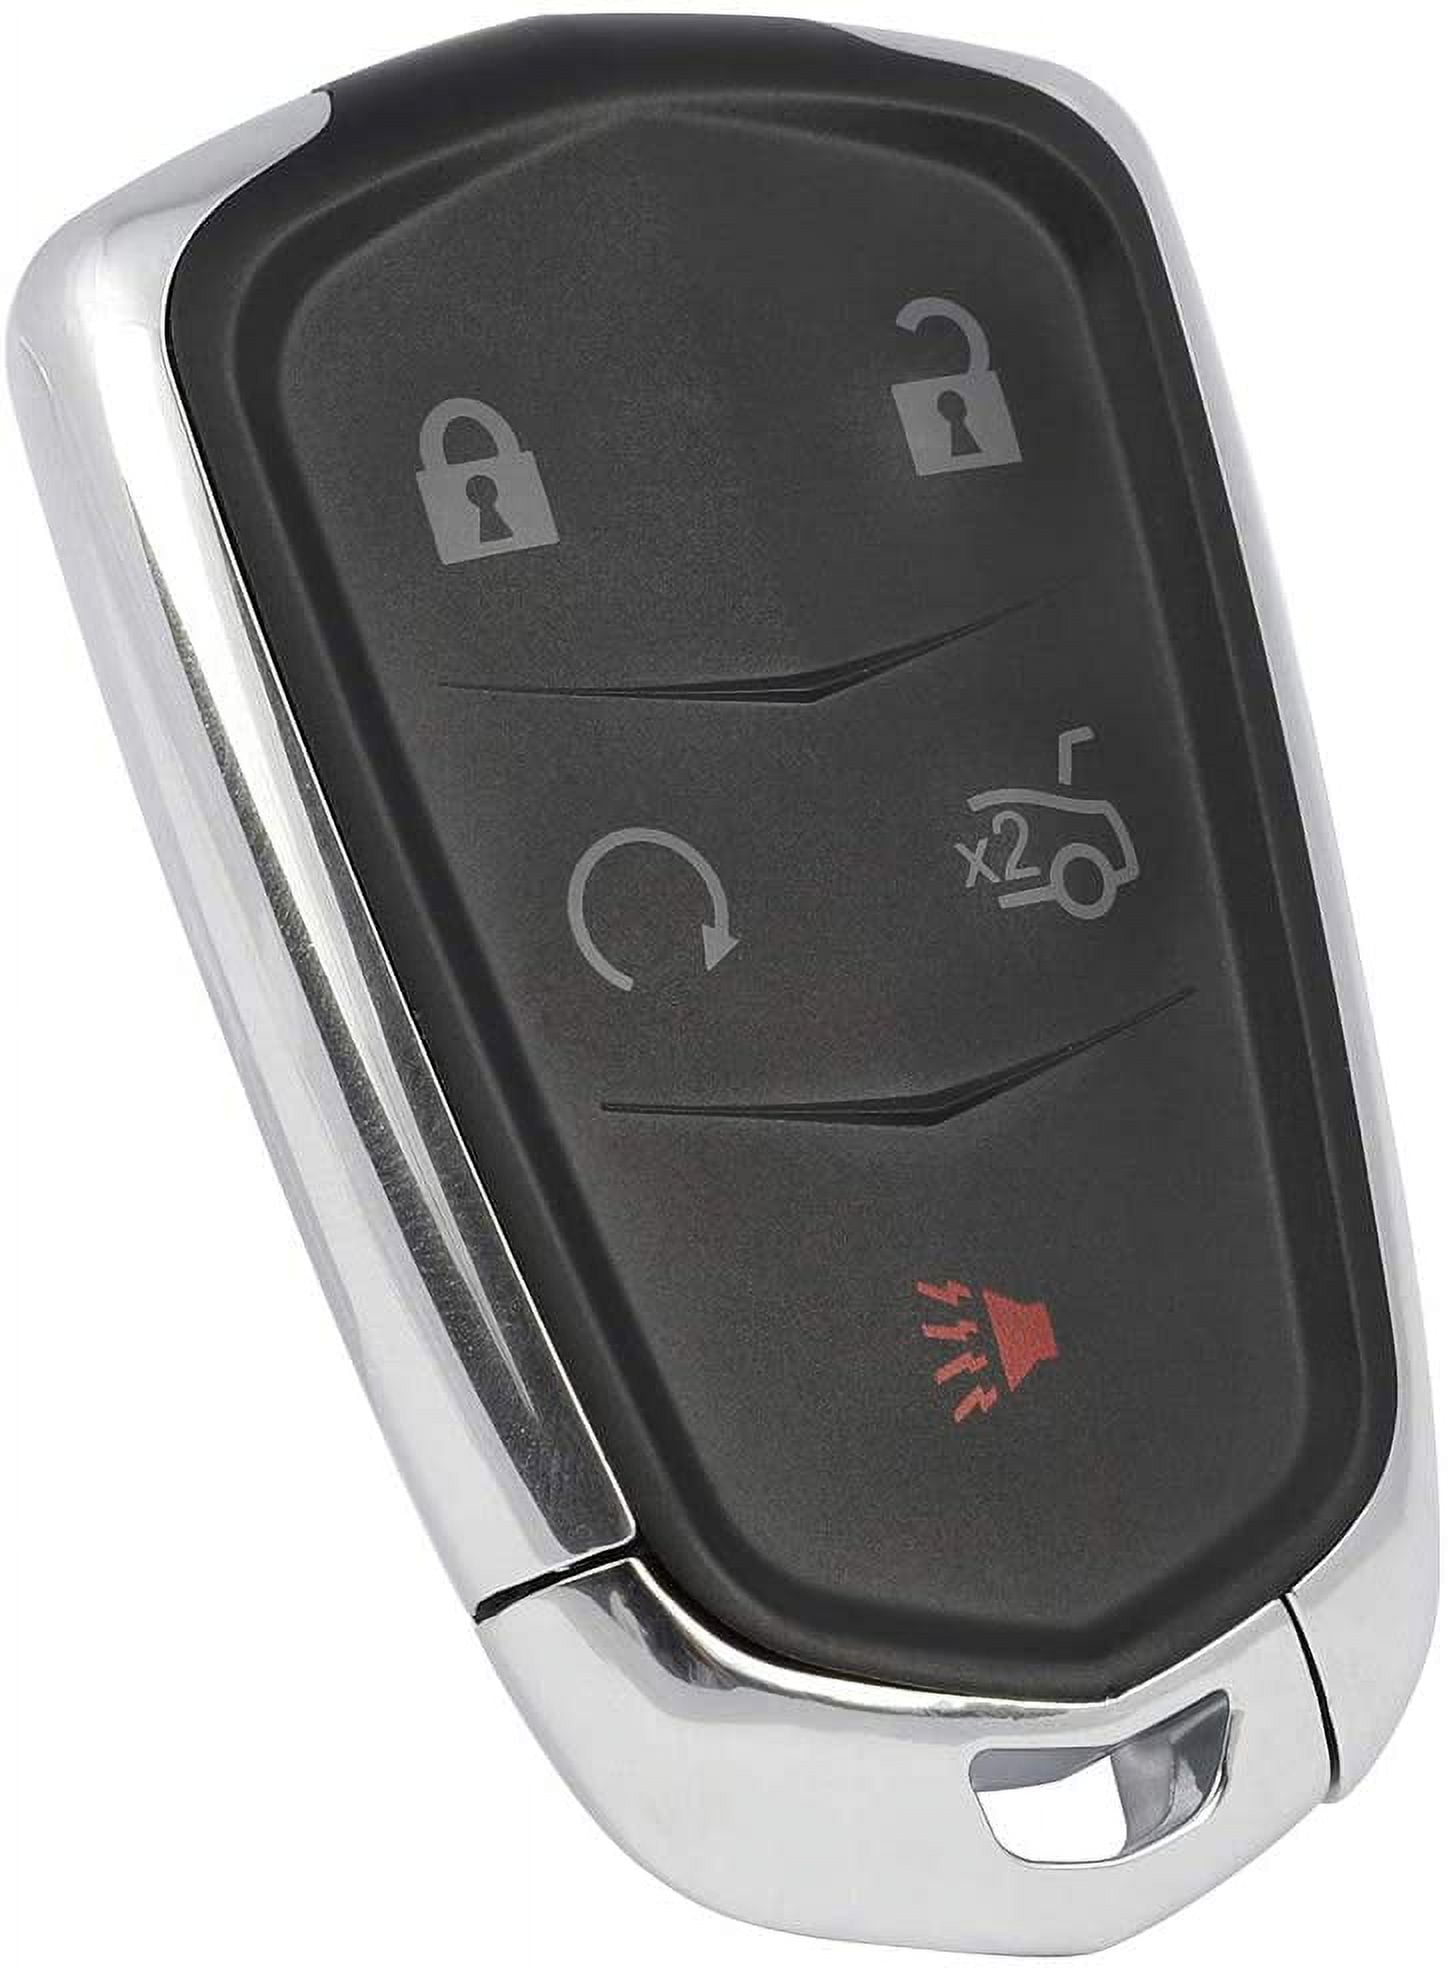 ECCPP Replacement 1 X Remote UNCUT ignition key fob 315 MHz flip